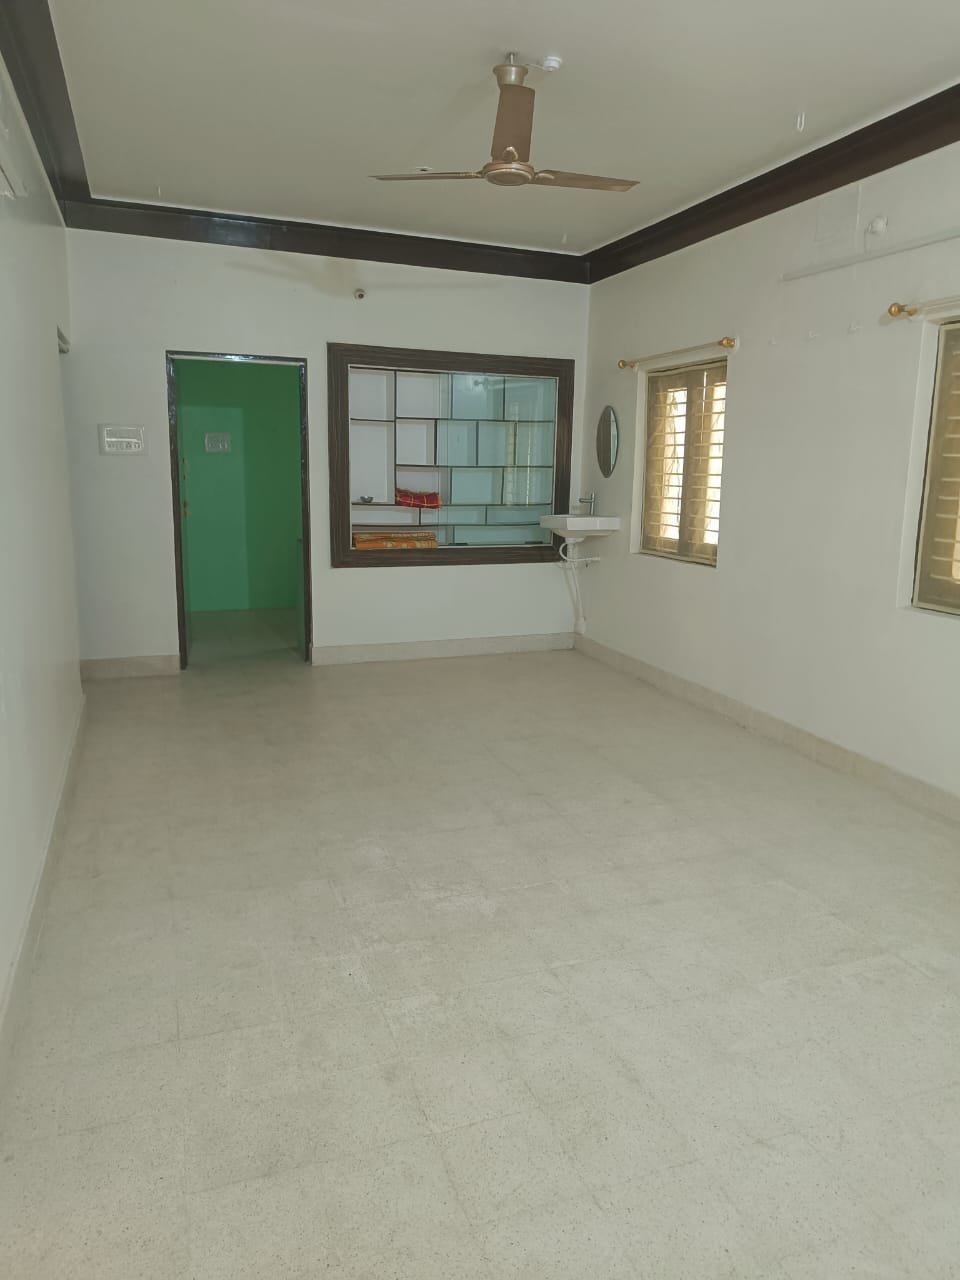 1 BHK Independent House for Lease Only at JAML2 - 4979-19lakh in Nandini Layout